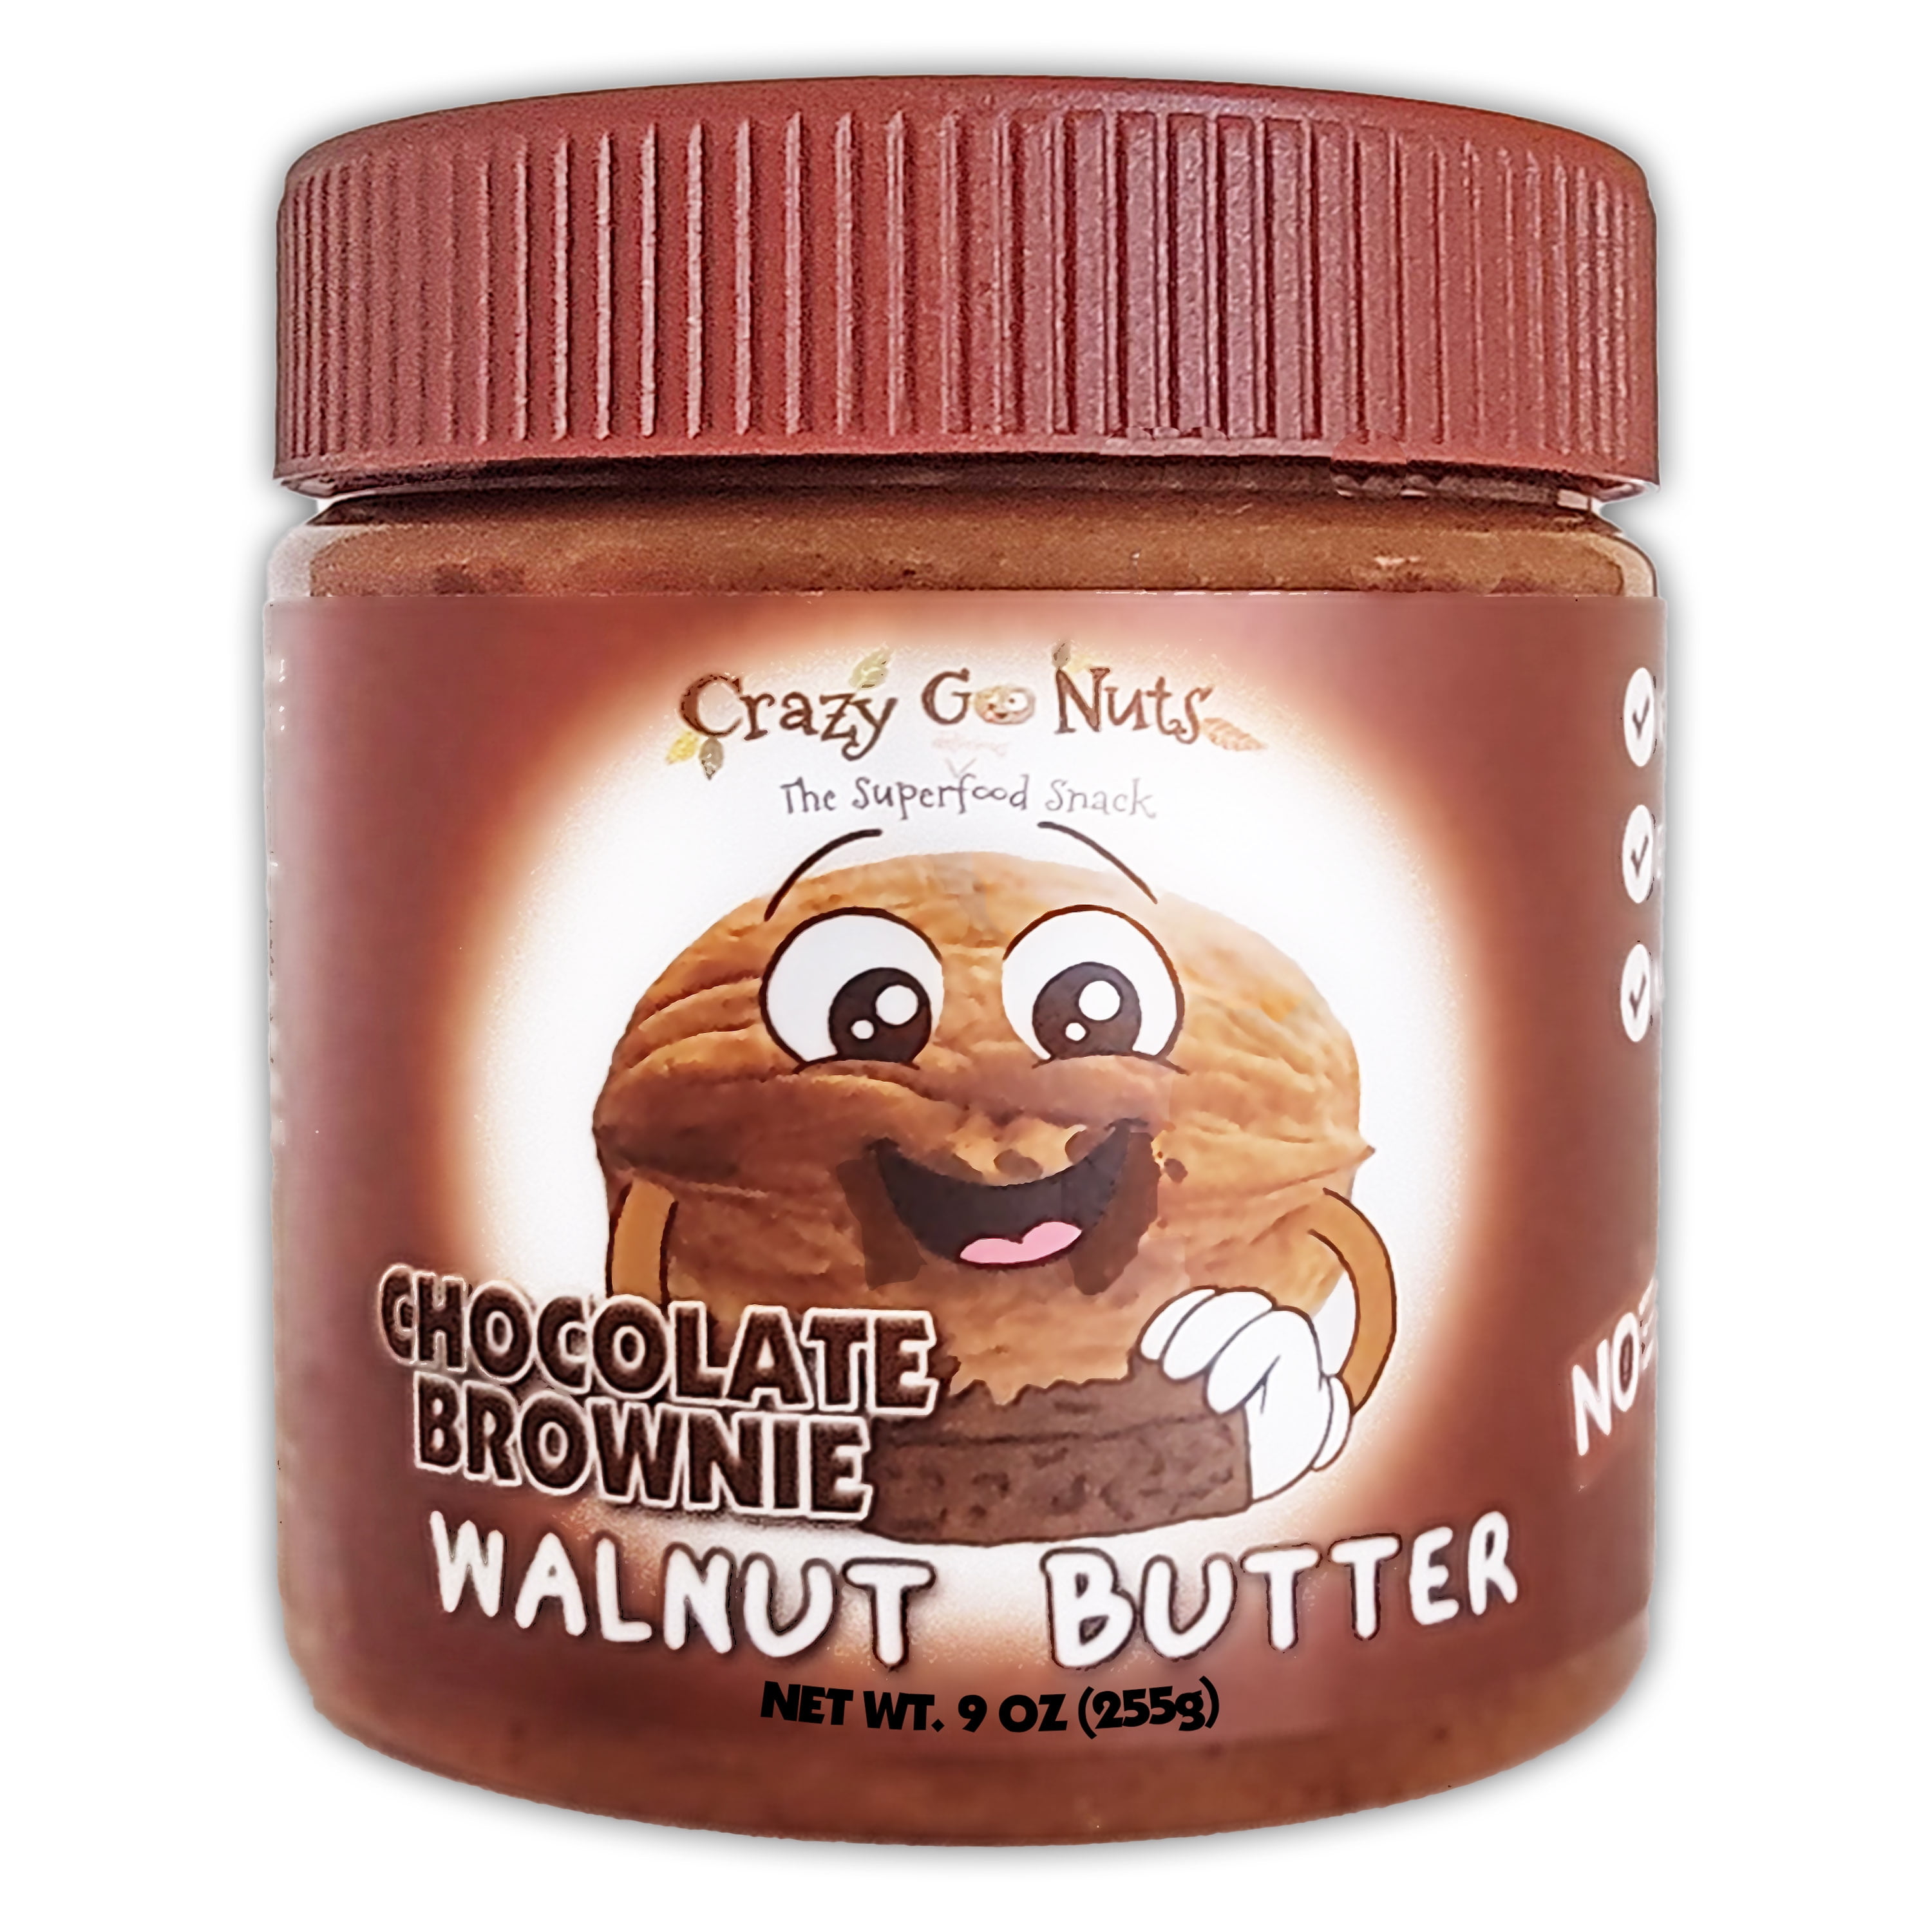 Crazy Go Nuts Walnut Butter - Chocolate Brownie, 9 oz (1-Pack) - Healthy Snacks, Keto, Vegan, Low Carb, Gluten Free, Superfood - Natural, Non-GMO, ALA, Omega 3 Fatty Acids, Good Fats and Antioxidants